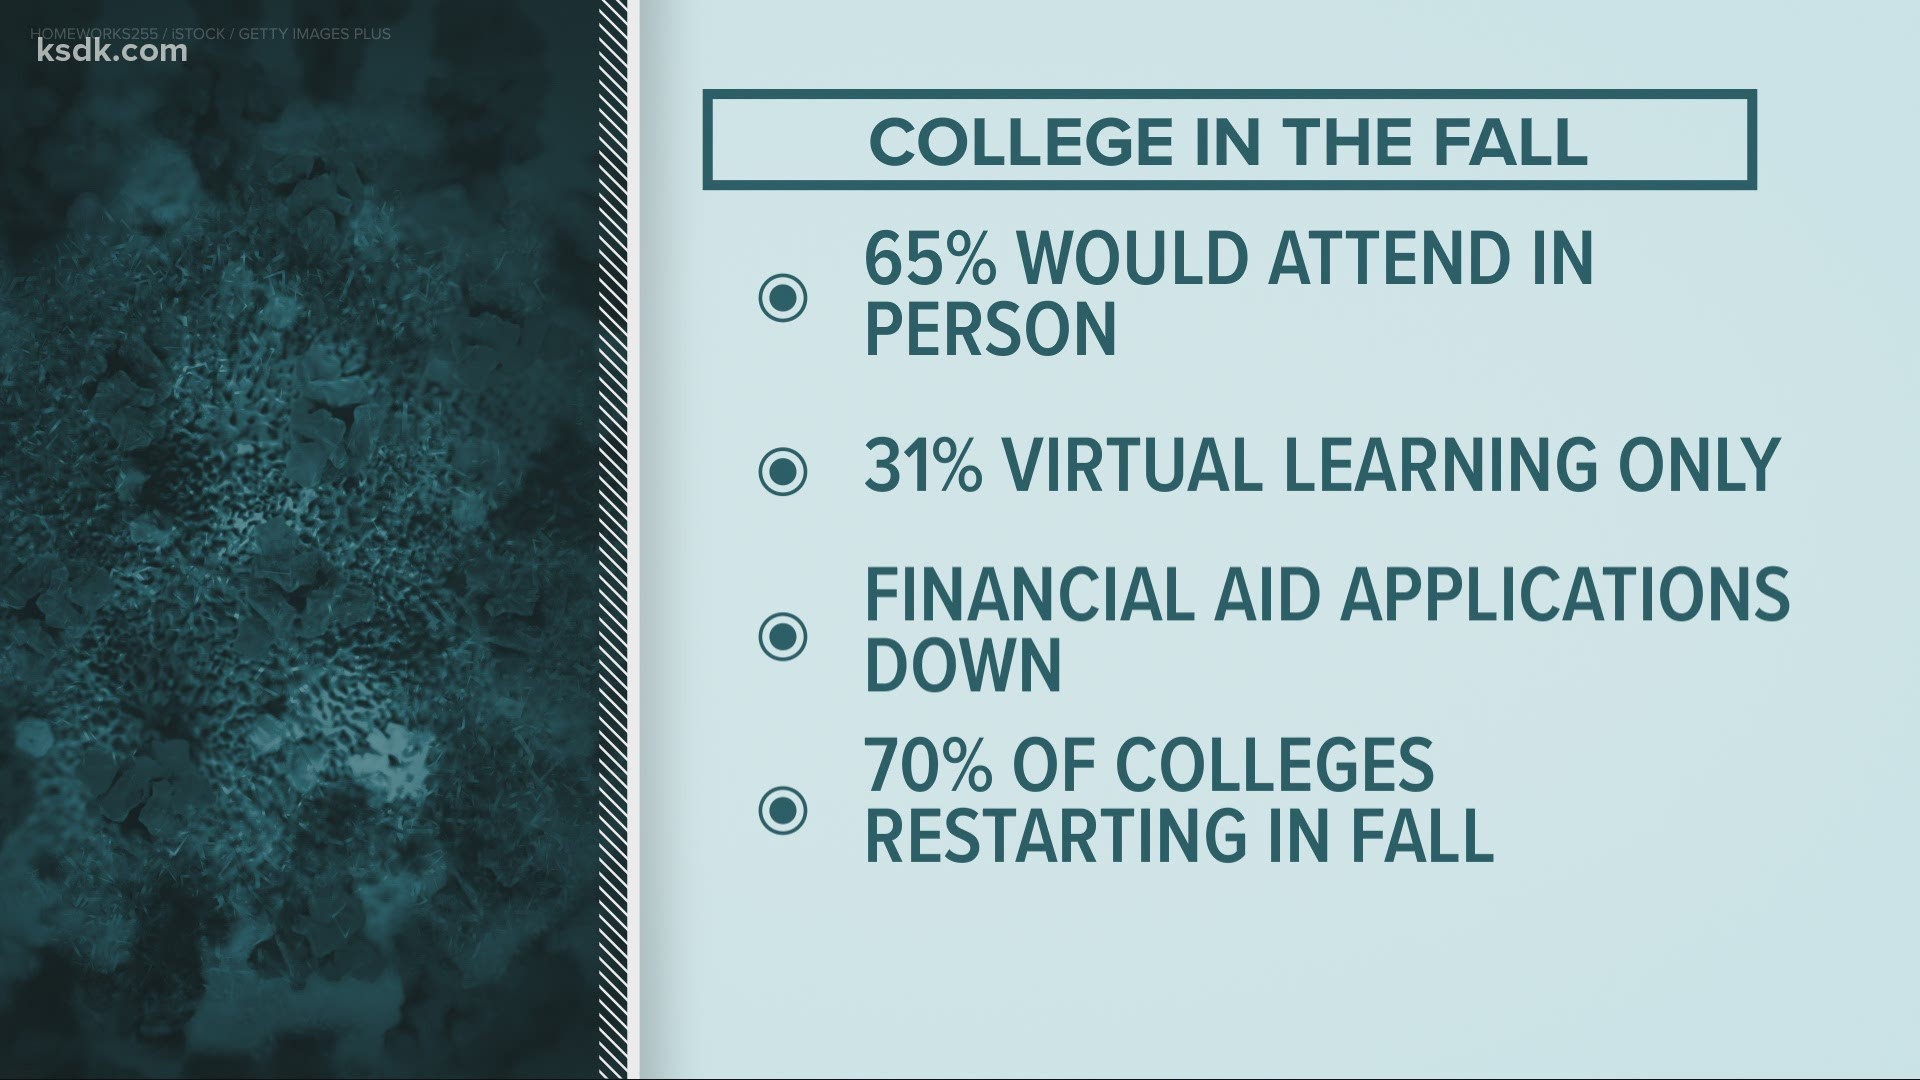 There will be a lot of changes coming to college campuses next academic year.